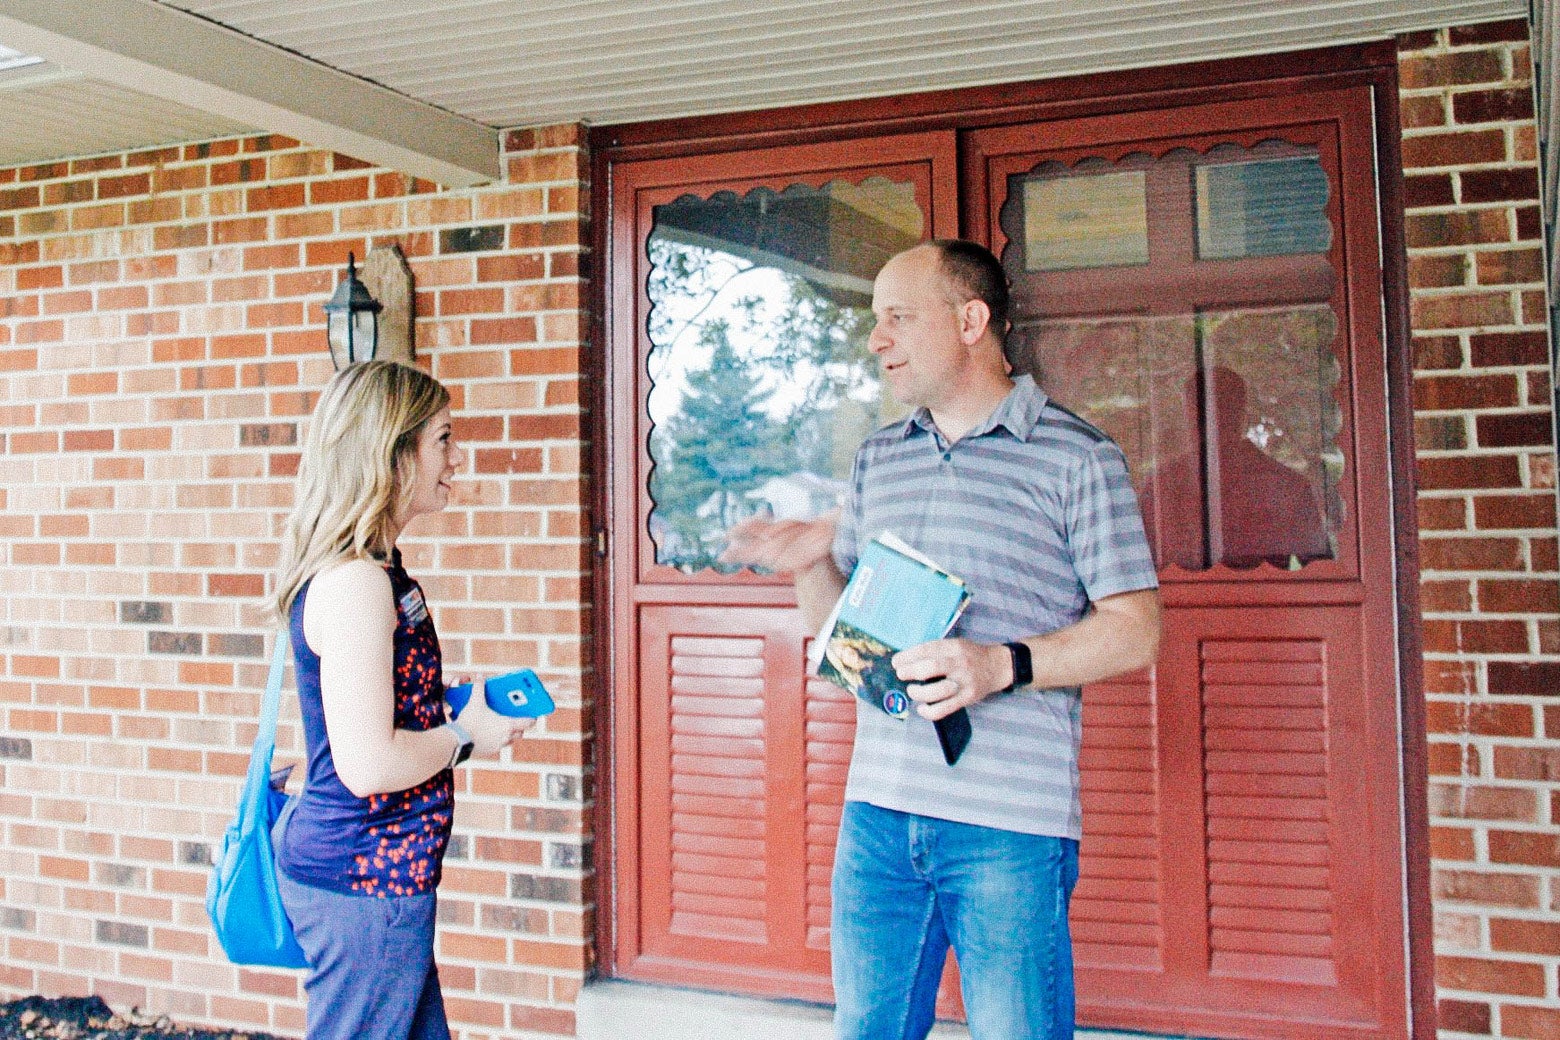 Pennsylvania state Senate candidate Katie Muth talks to Collegeville resident Nigel Piggott, who said he planned to support her.